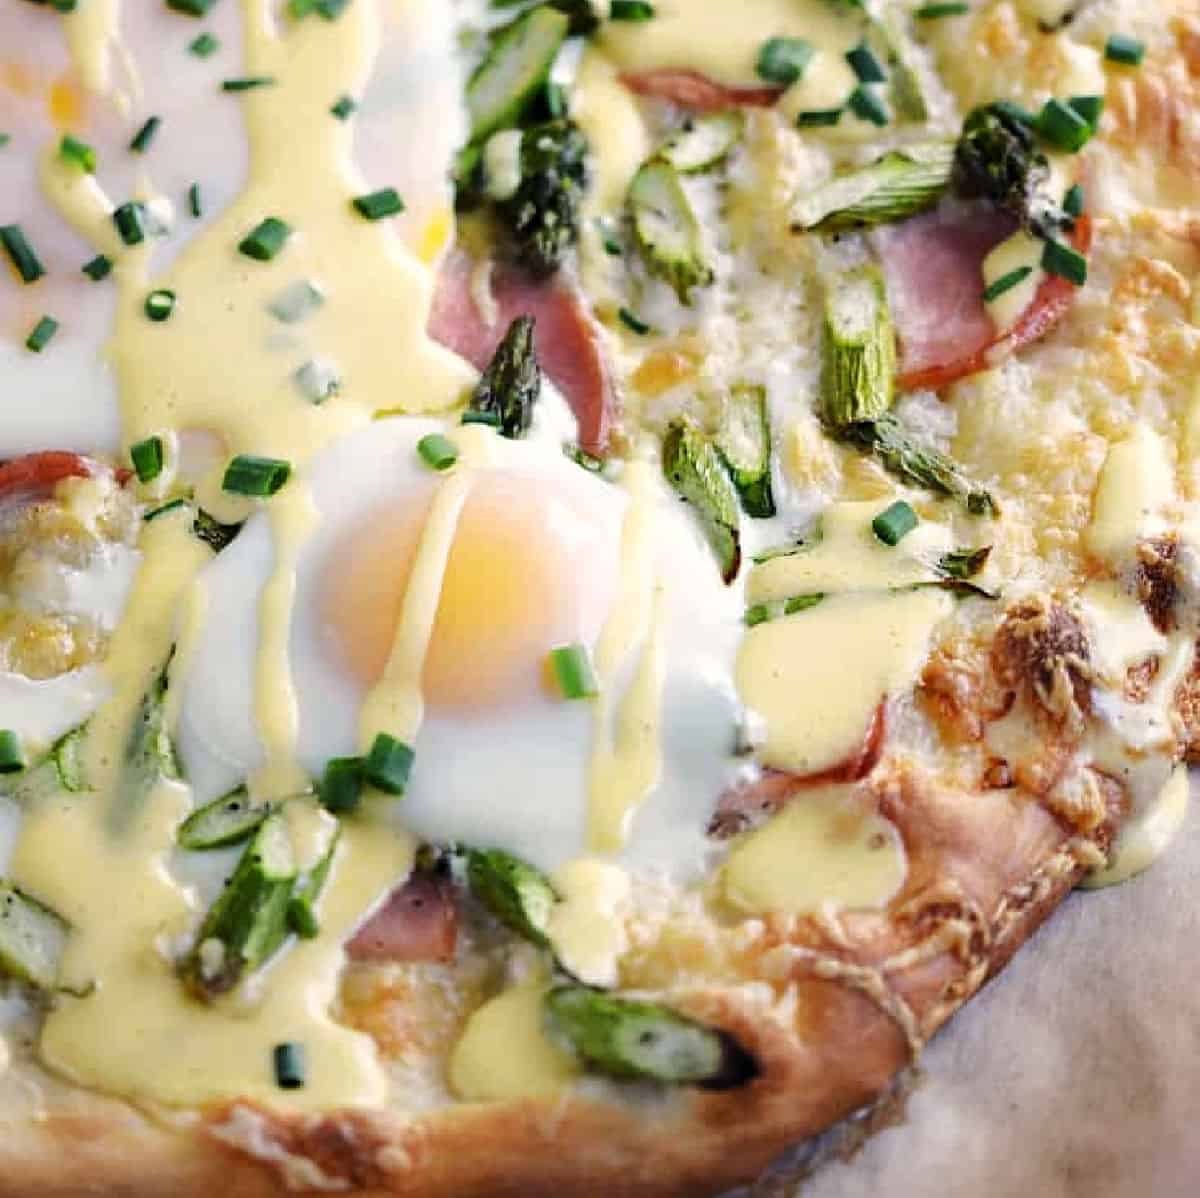 Pizza topped with sunny side up eggs, ham, asparagus, hollandaise sauce and chives.